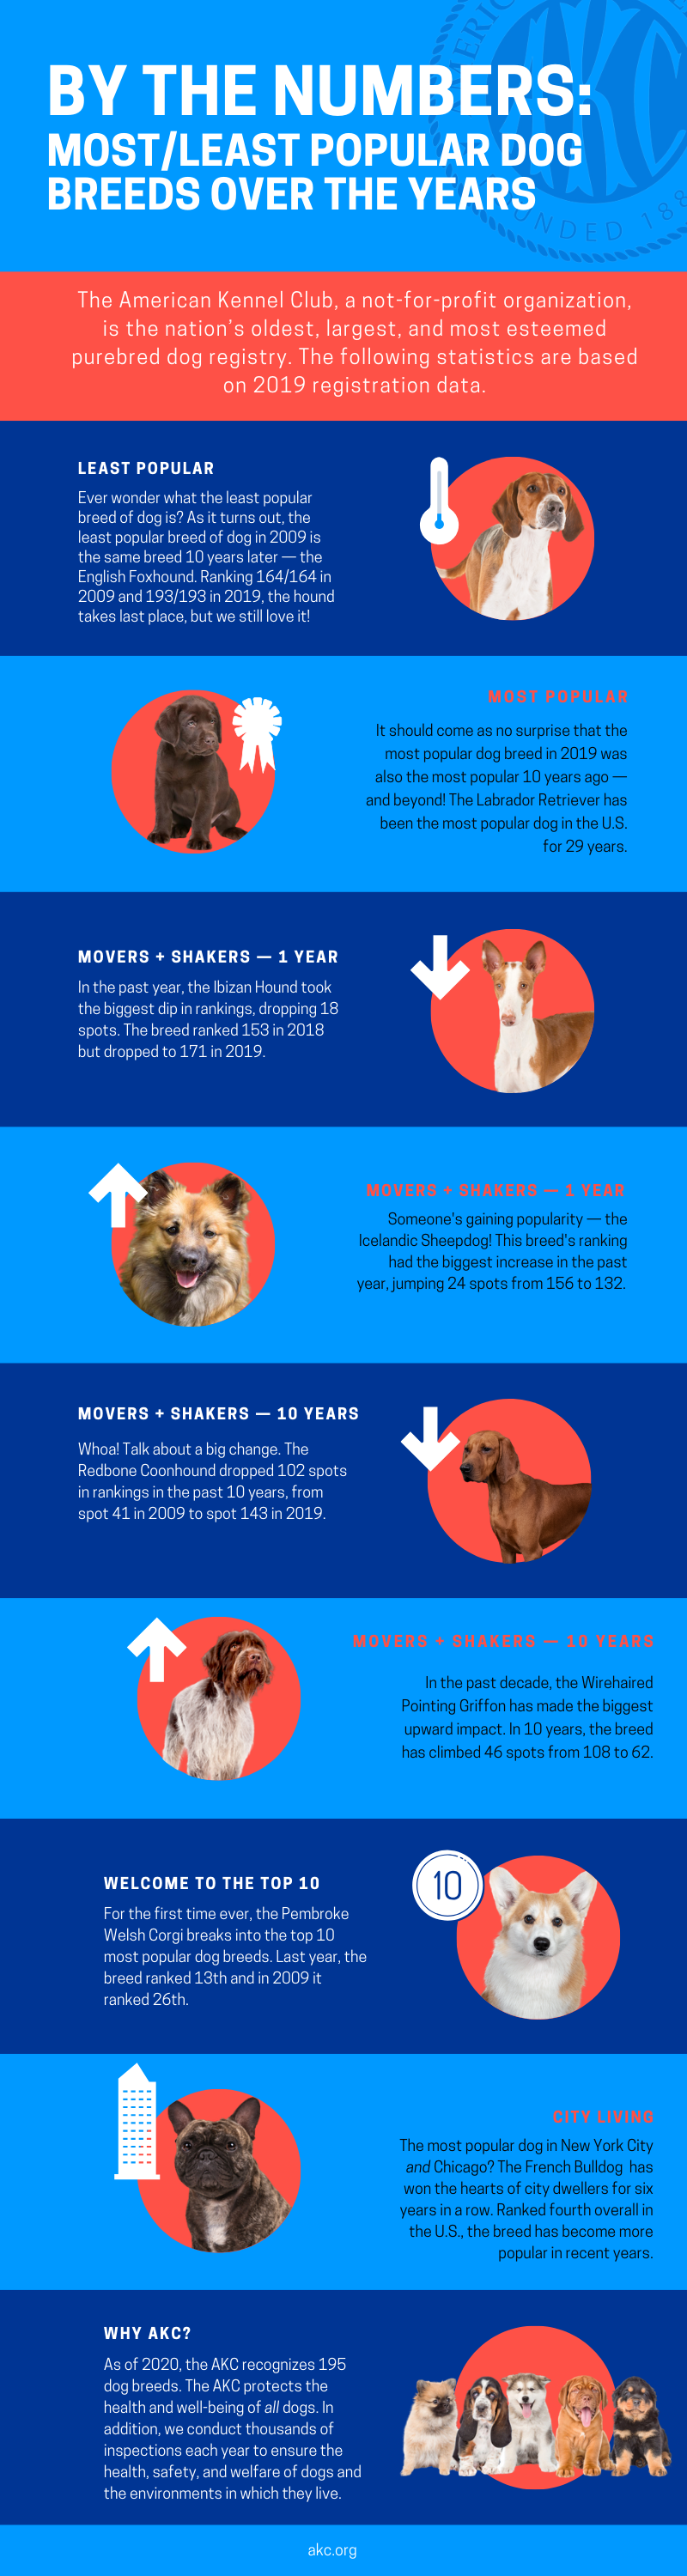 By The Numbers Most & Least Popular Dog Breeds Over the Years